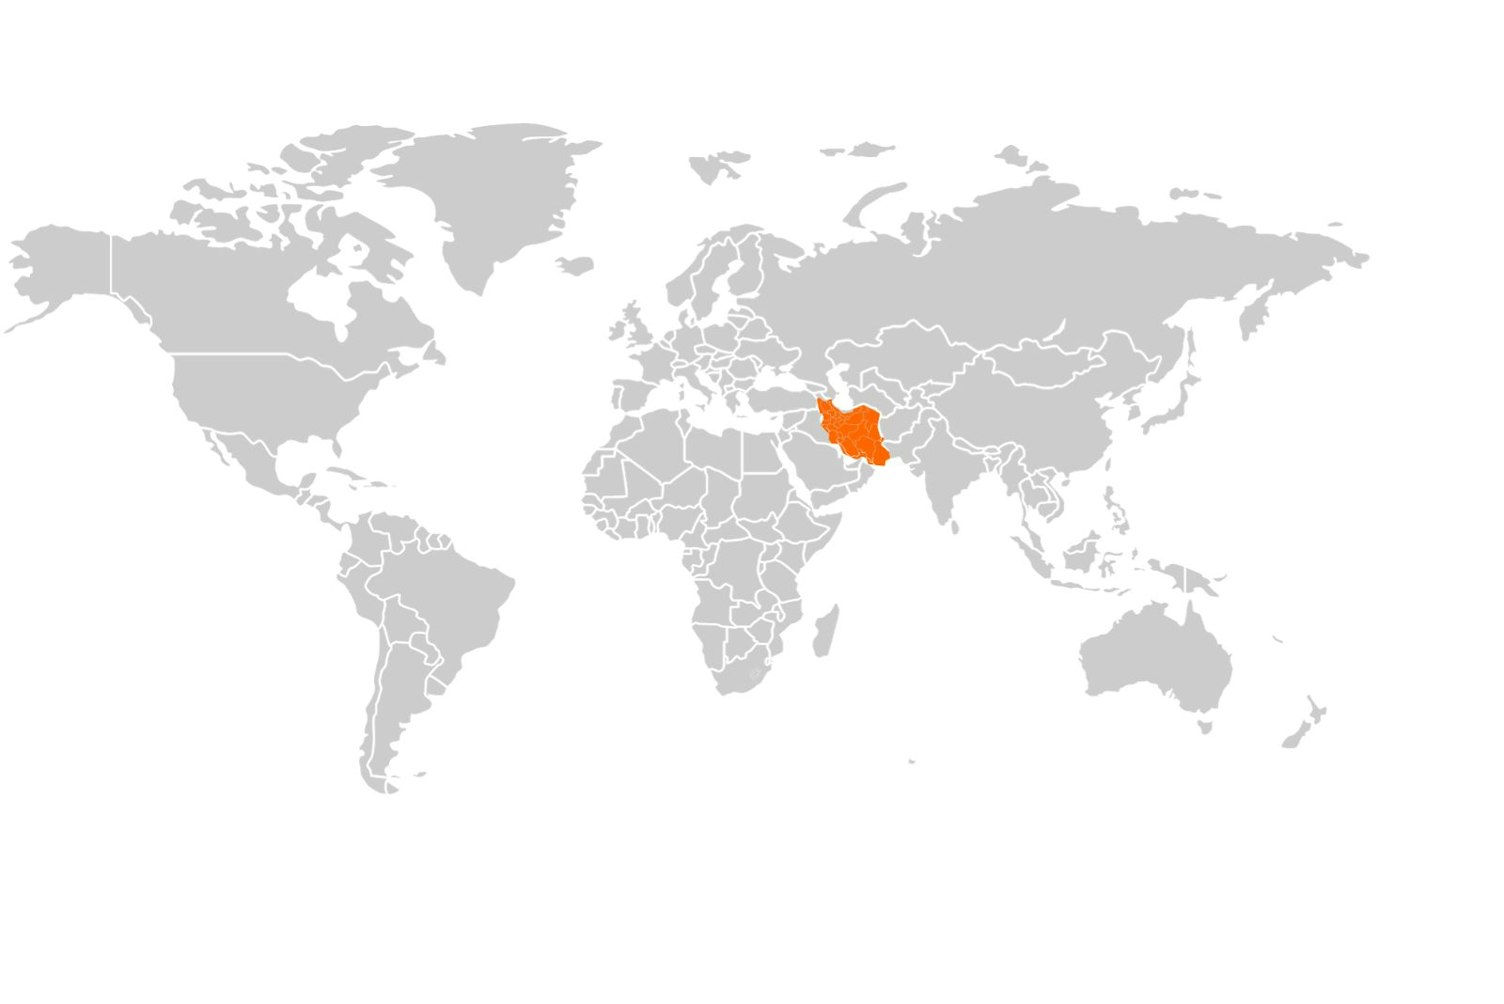 Iran in the world map